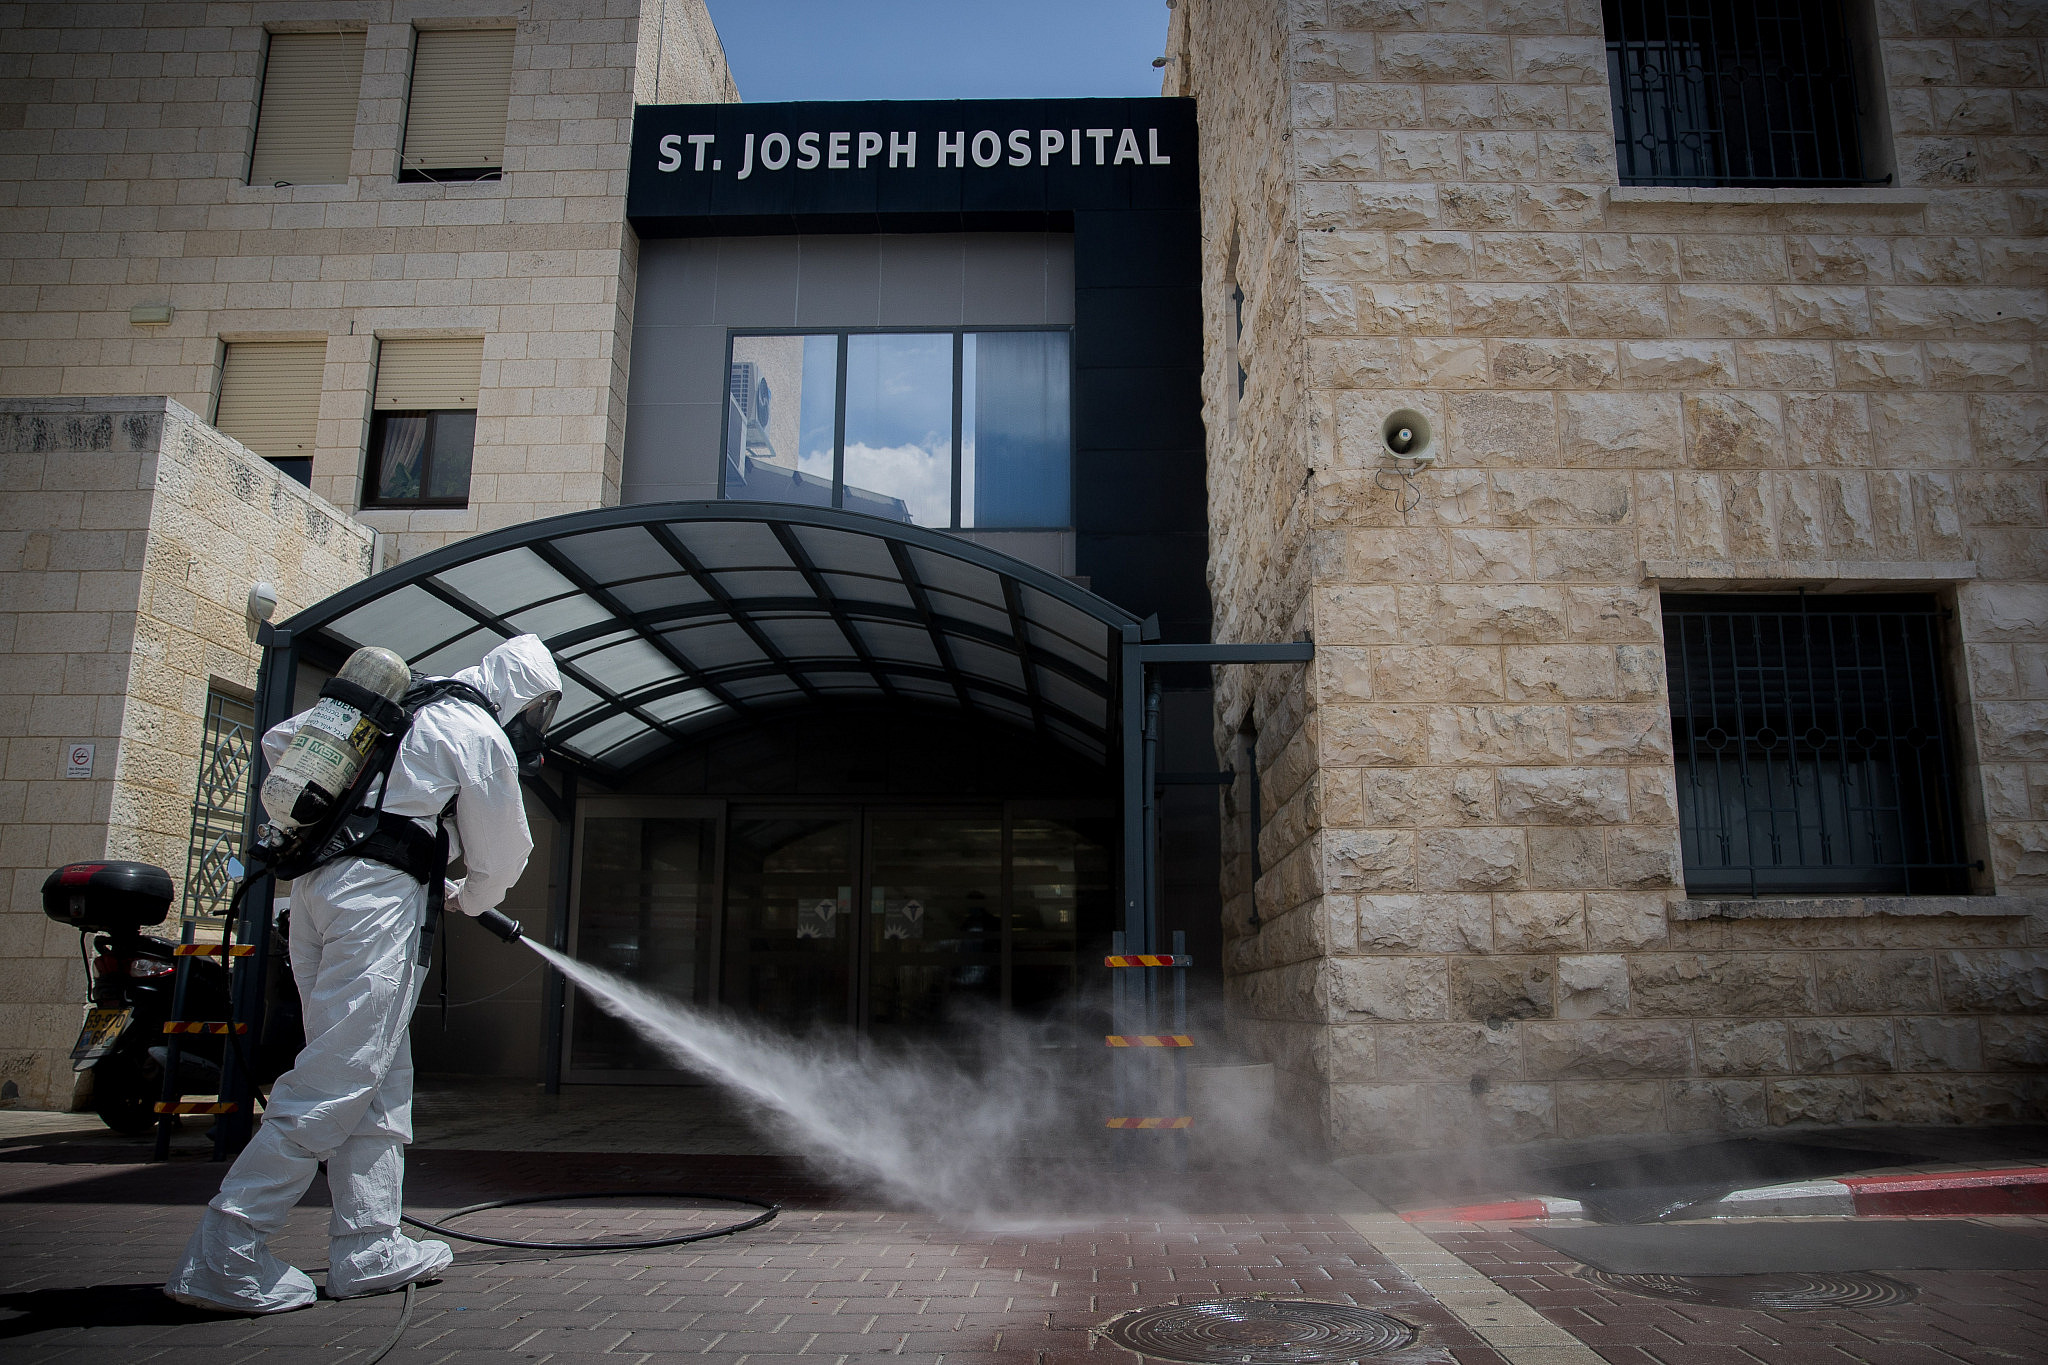 An Israeli firefighter disinfects the entrance to St Joseph Hospital in East Jerusalem as a preventive measure against the spread of the coronavirus, April 16, 2020, (Yonatan Sindel/Flash90)